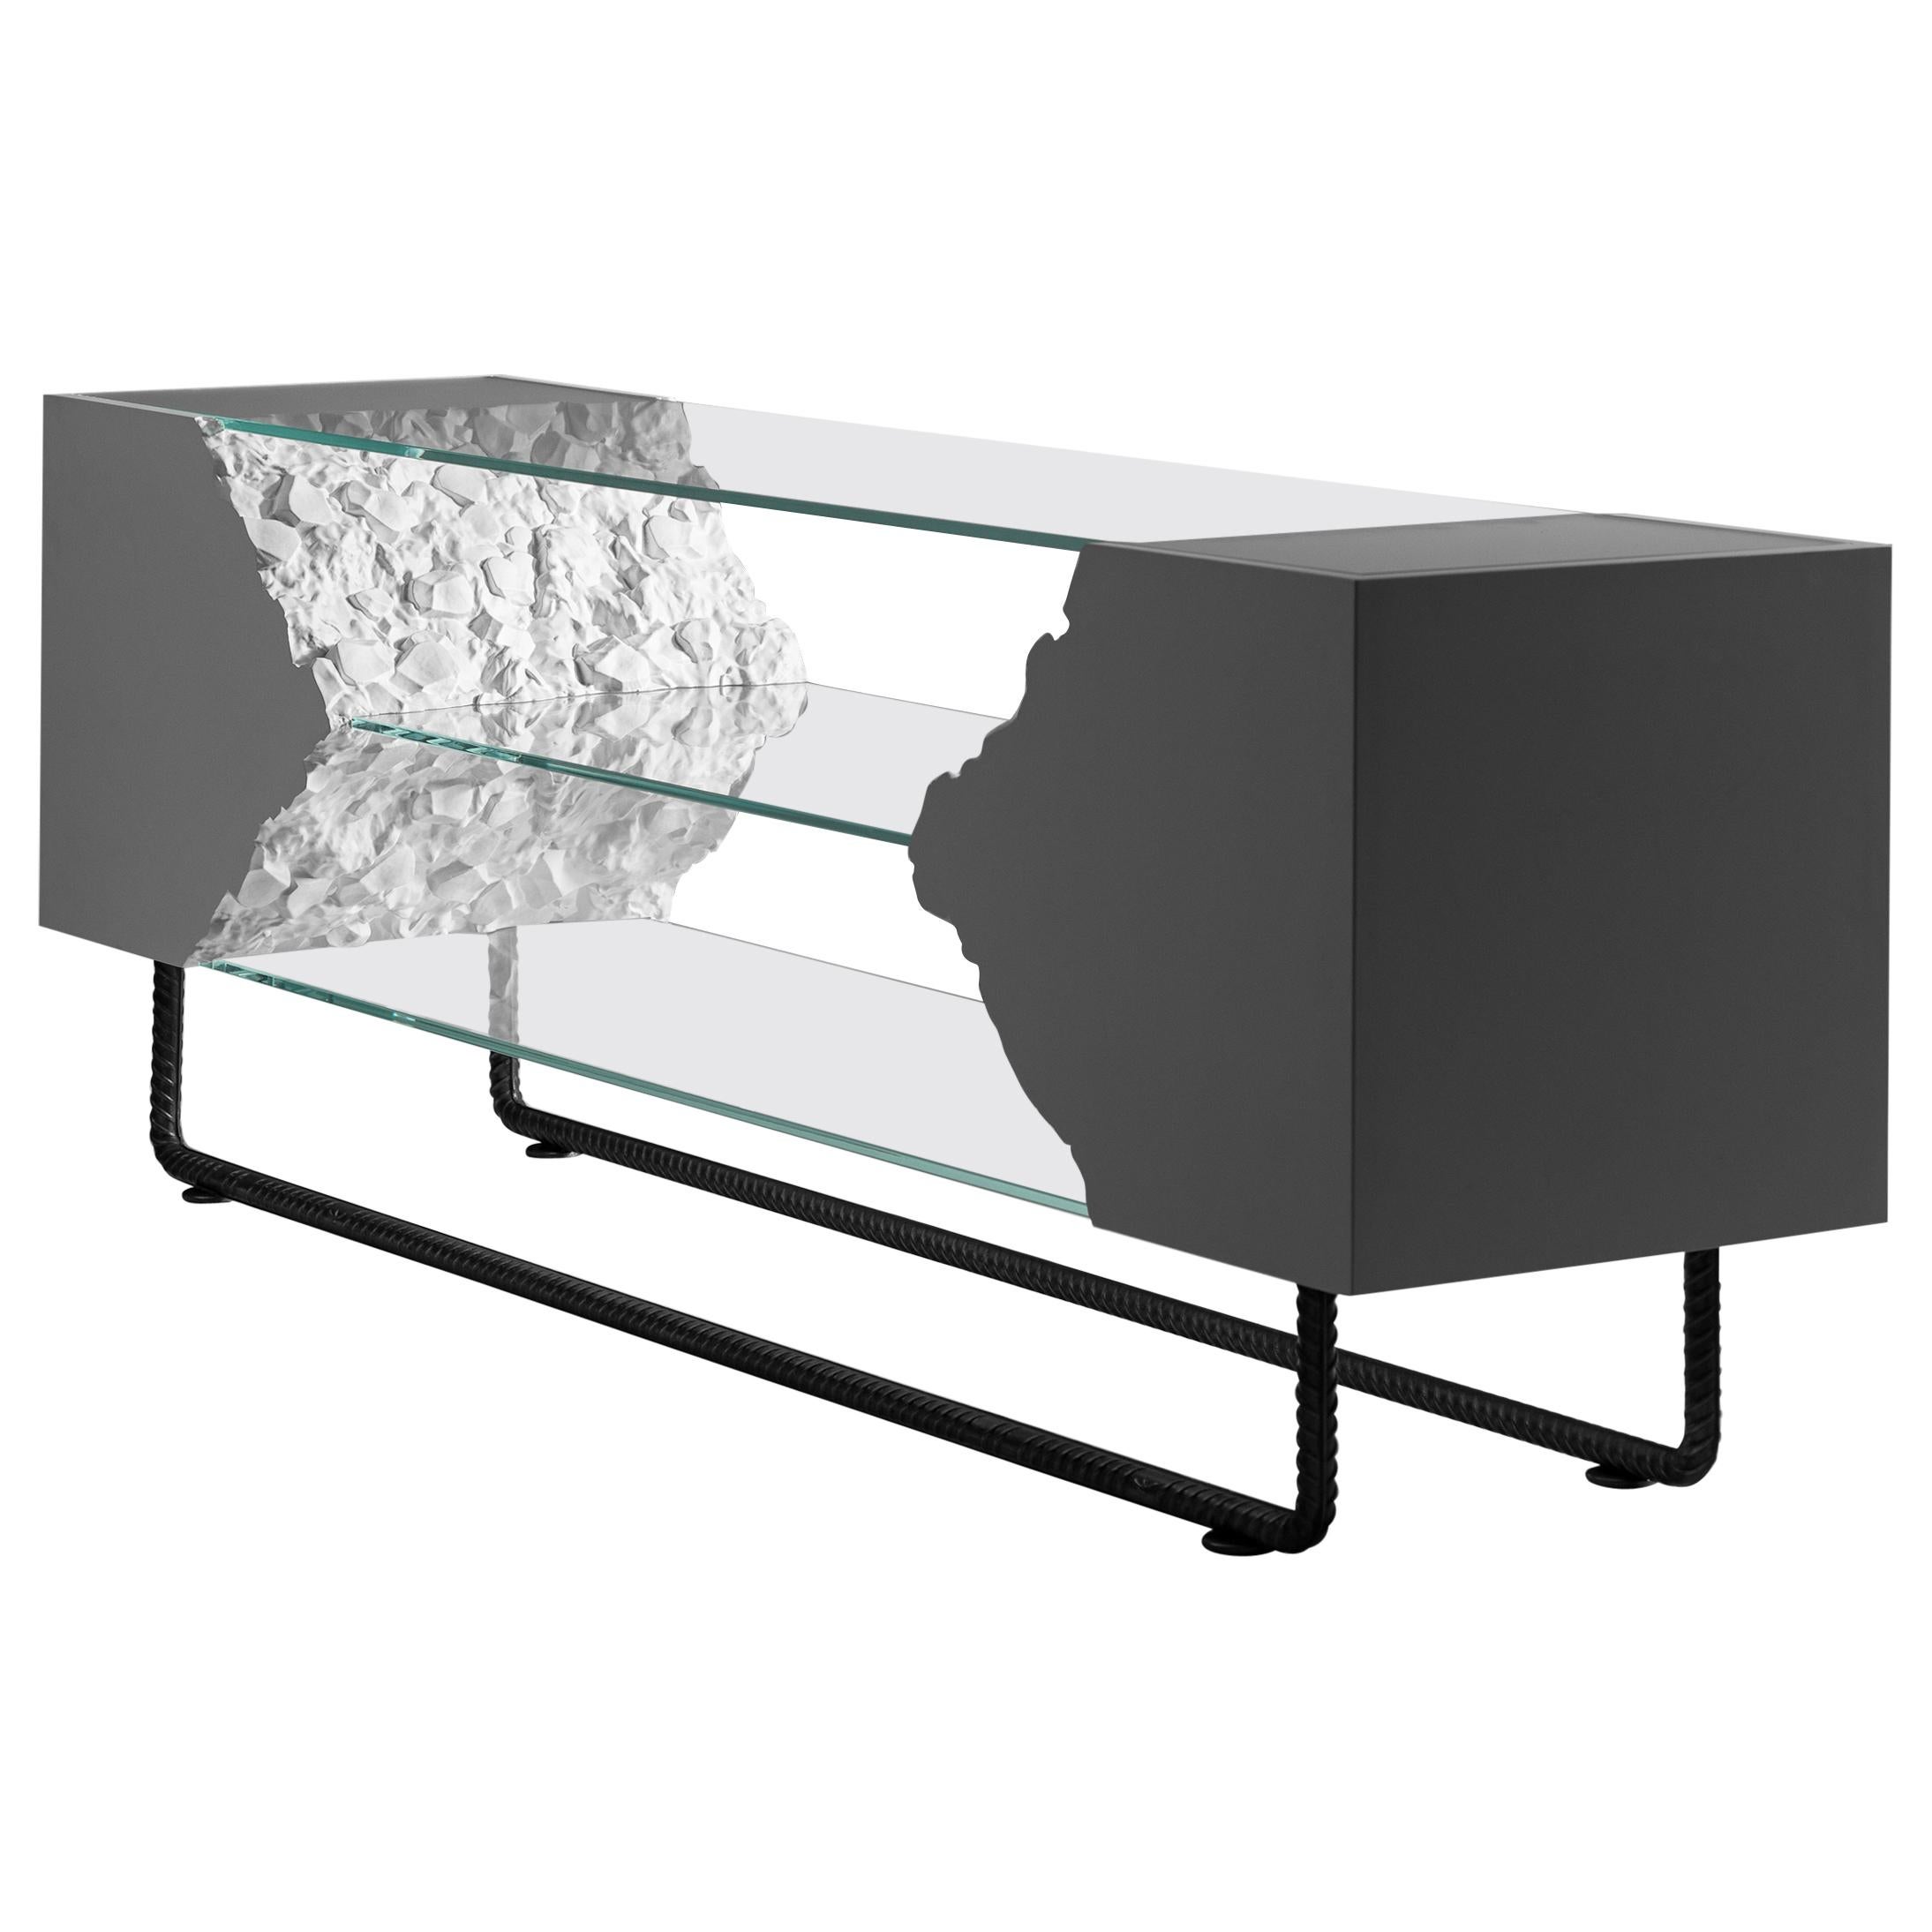 Console / TV Table Break Free Collection from Glass and Wood for Wild Interior For Sale